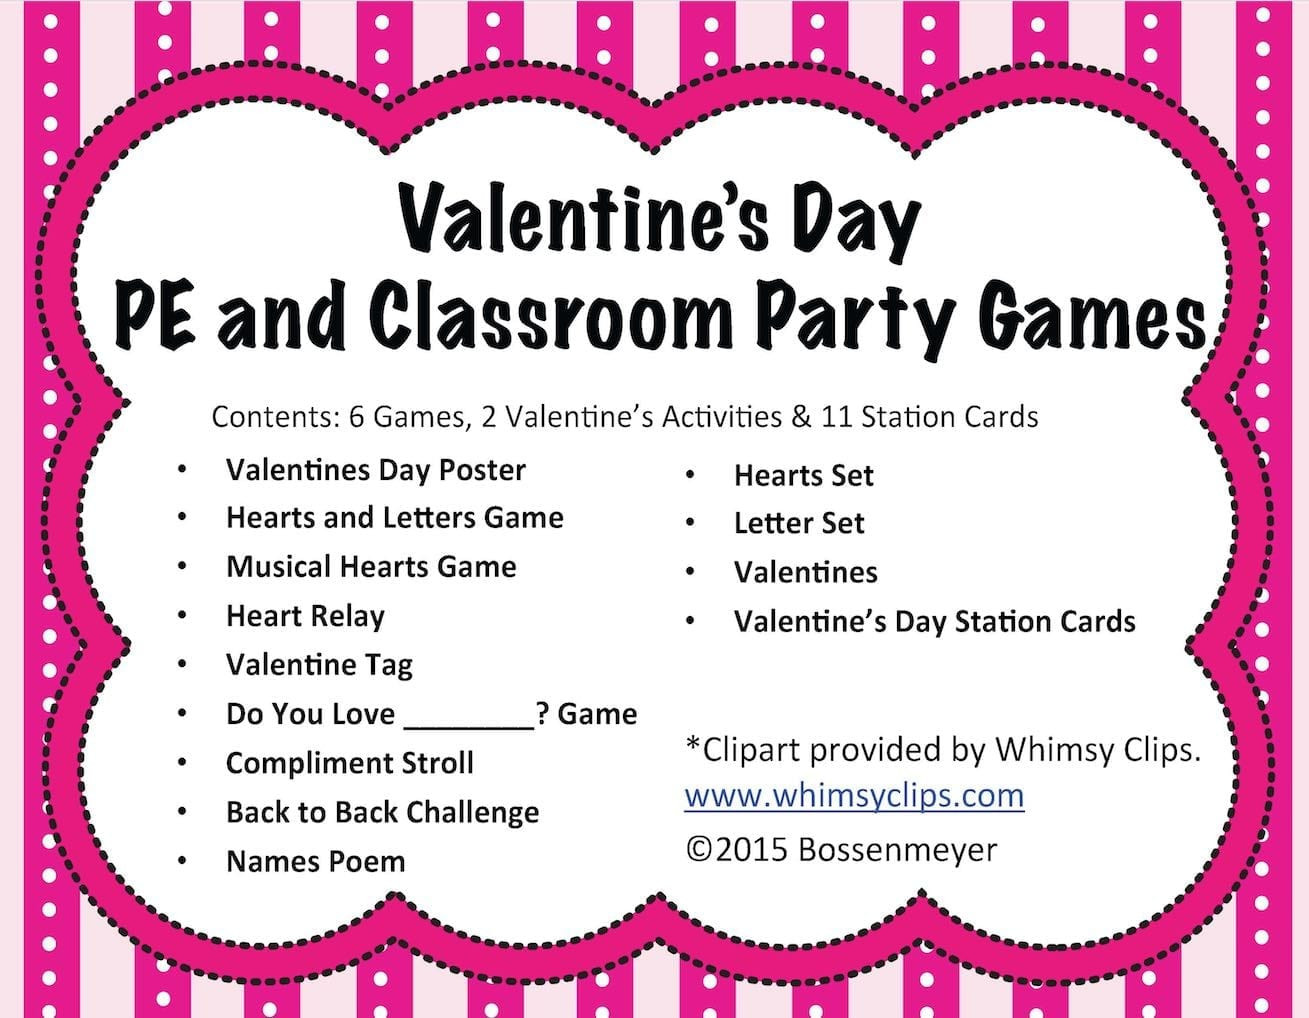 Valentines Day Party Games For Adults
 Classroom Party Games Valentine’s Day PE Peaceful